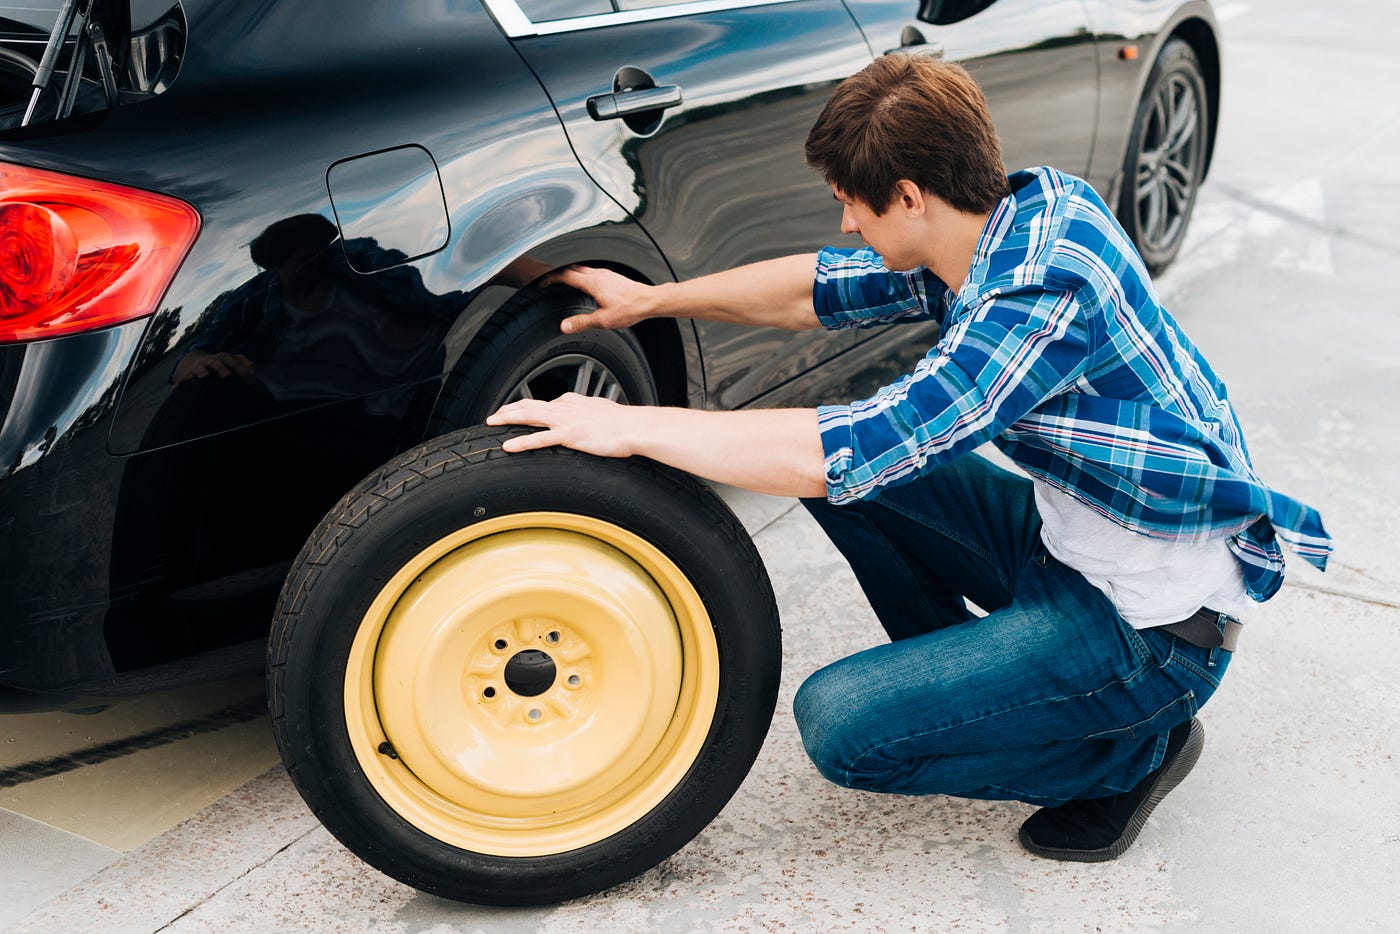 Replace Your Tyres Once They’re Worn Out - Service My Car